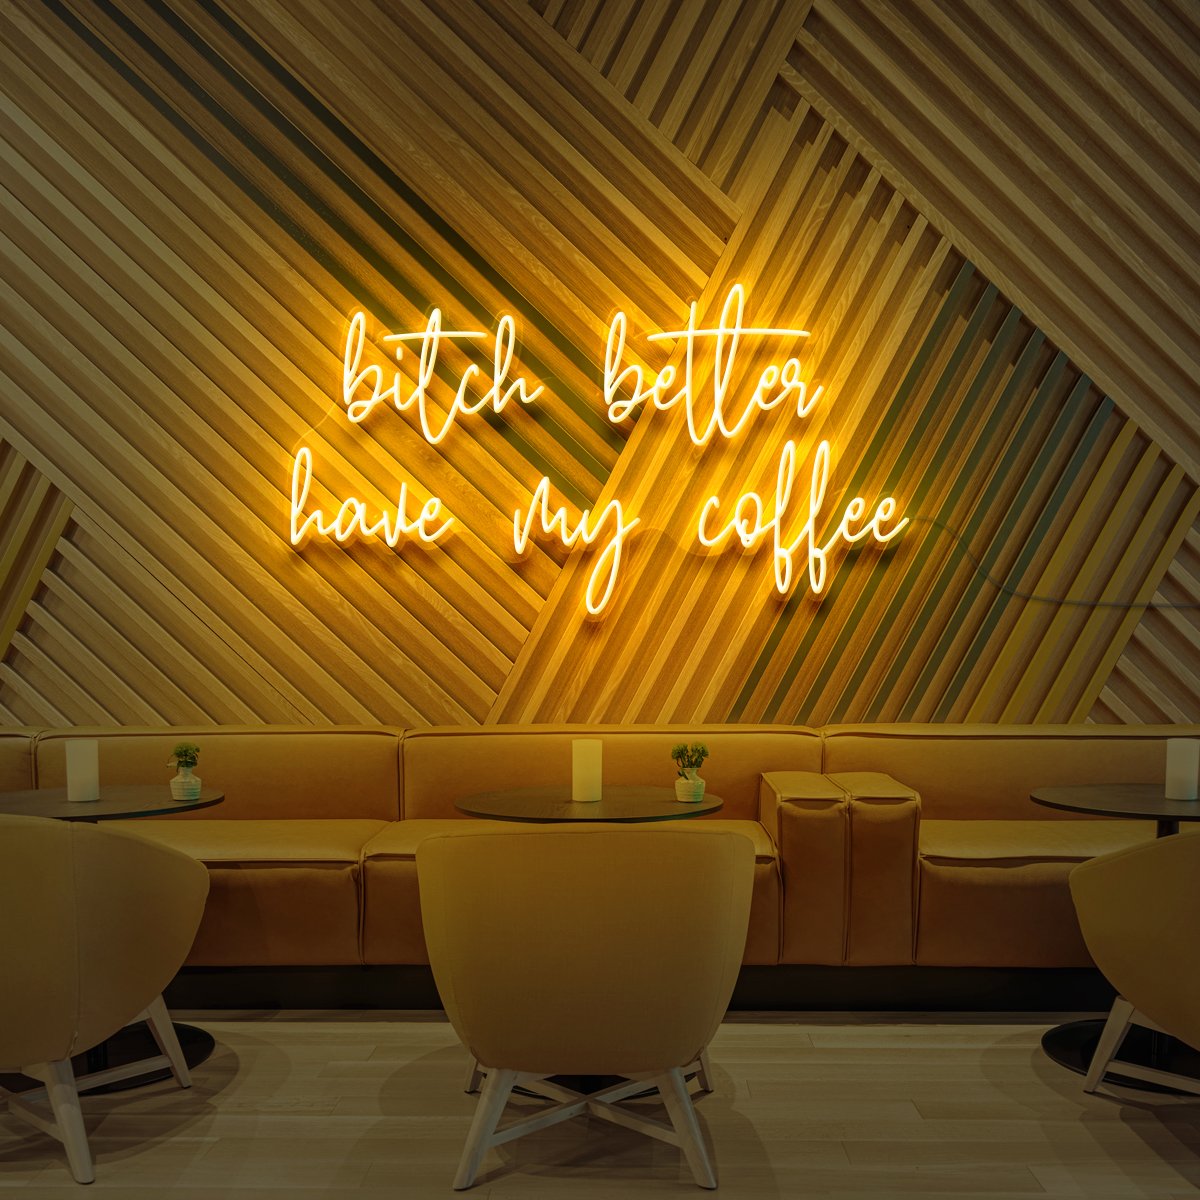 "Bitch Better Have My Coffee" Neon Sign for Coffee Shops by Neon Icons